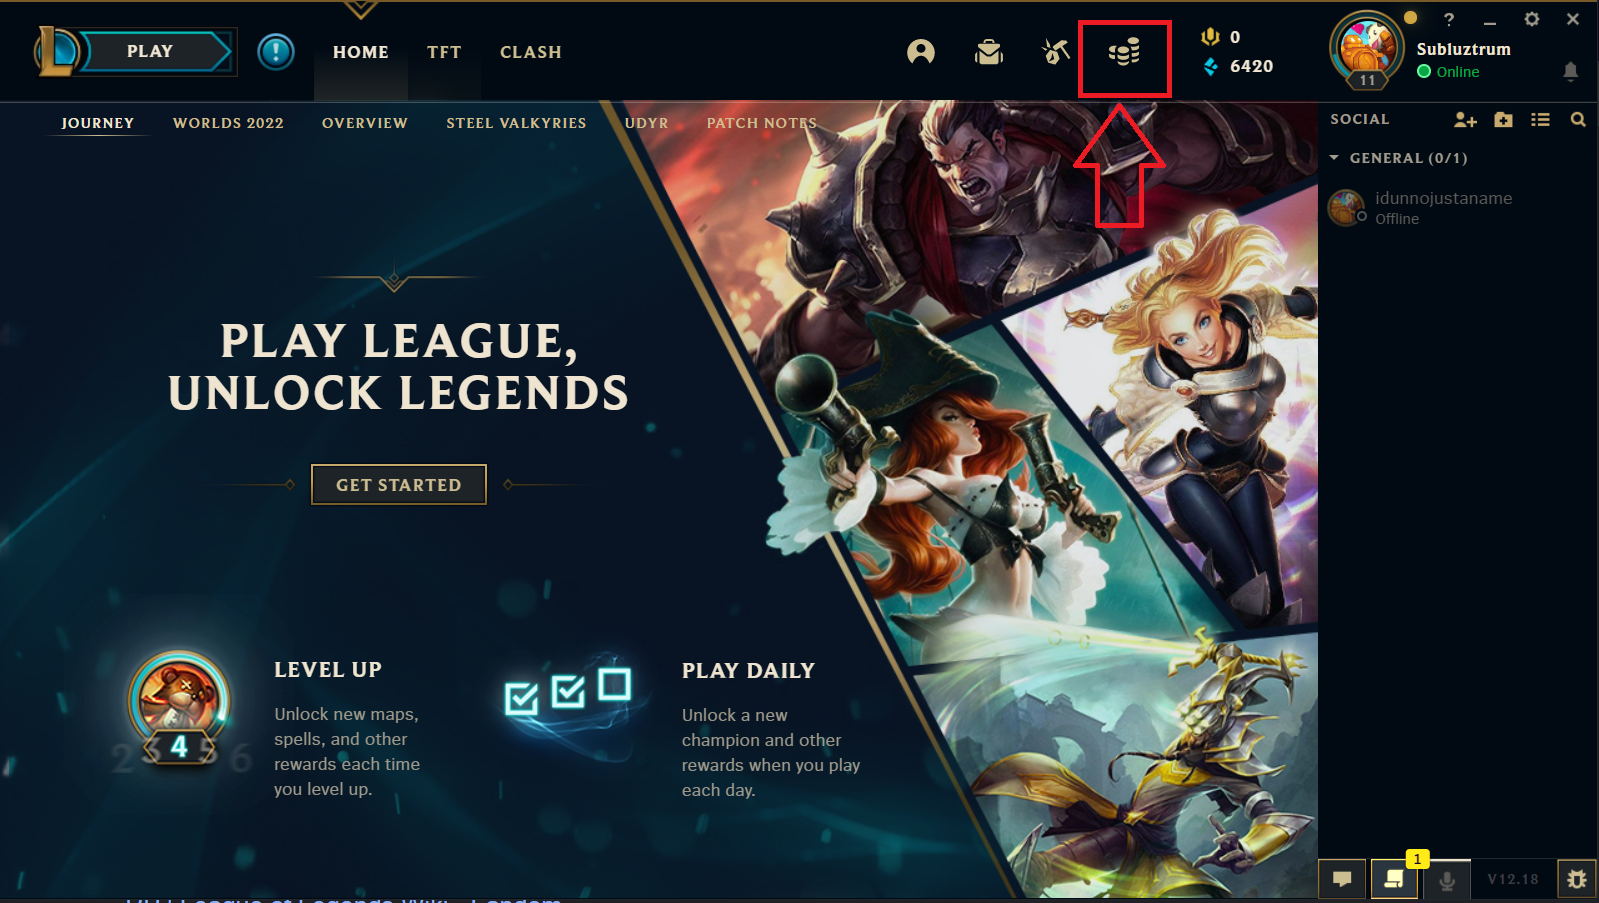 How to Change League of Legends Accounts: 4 Steps (with Pictures)